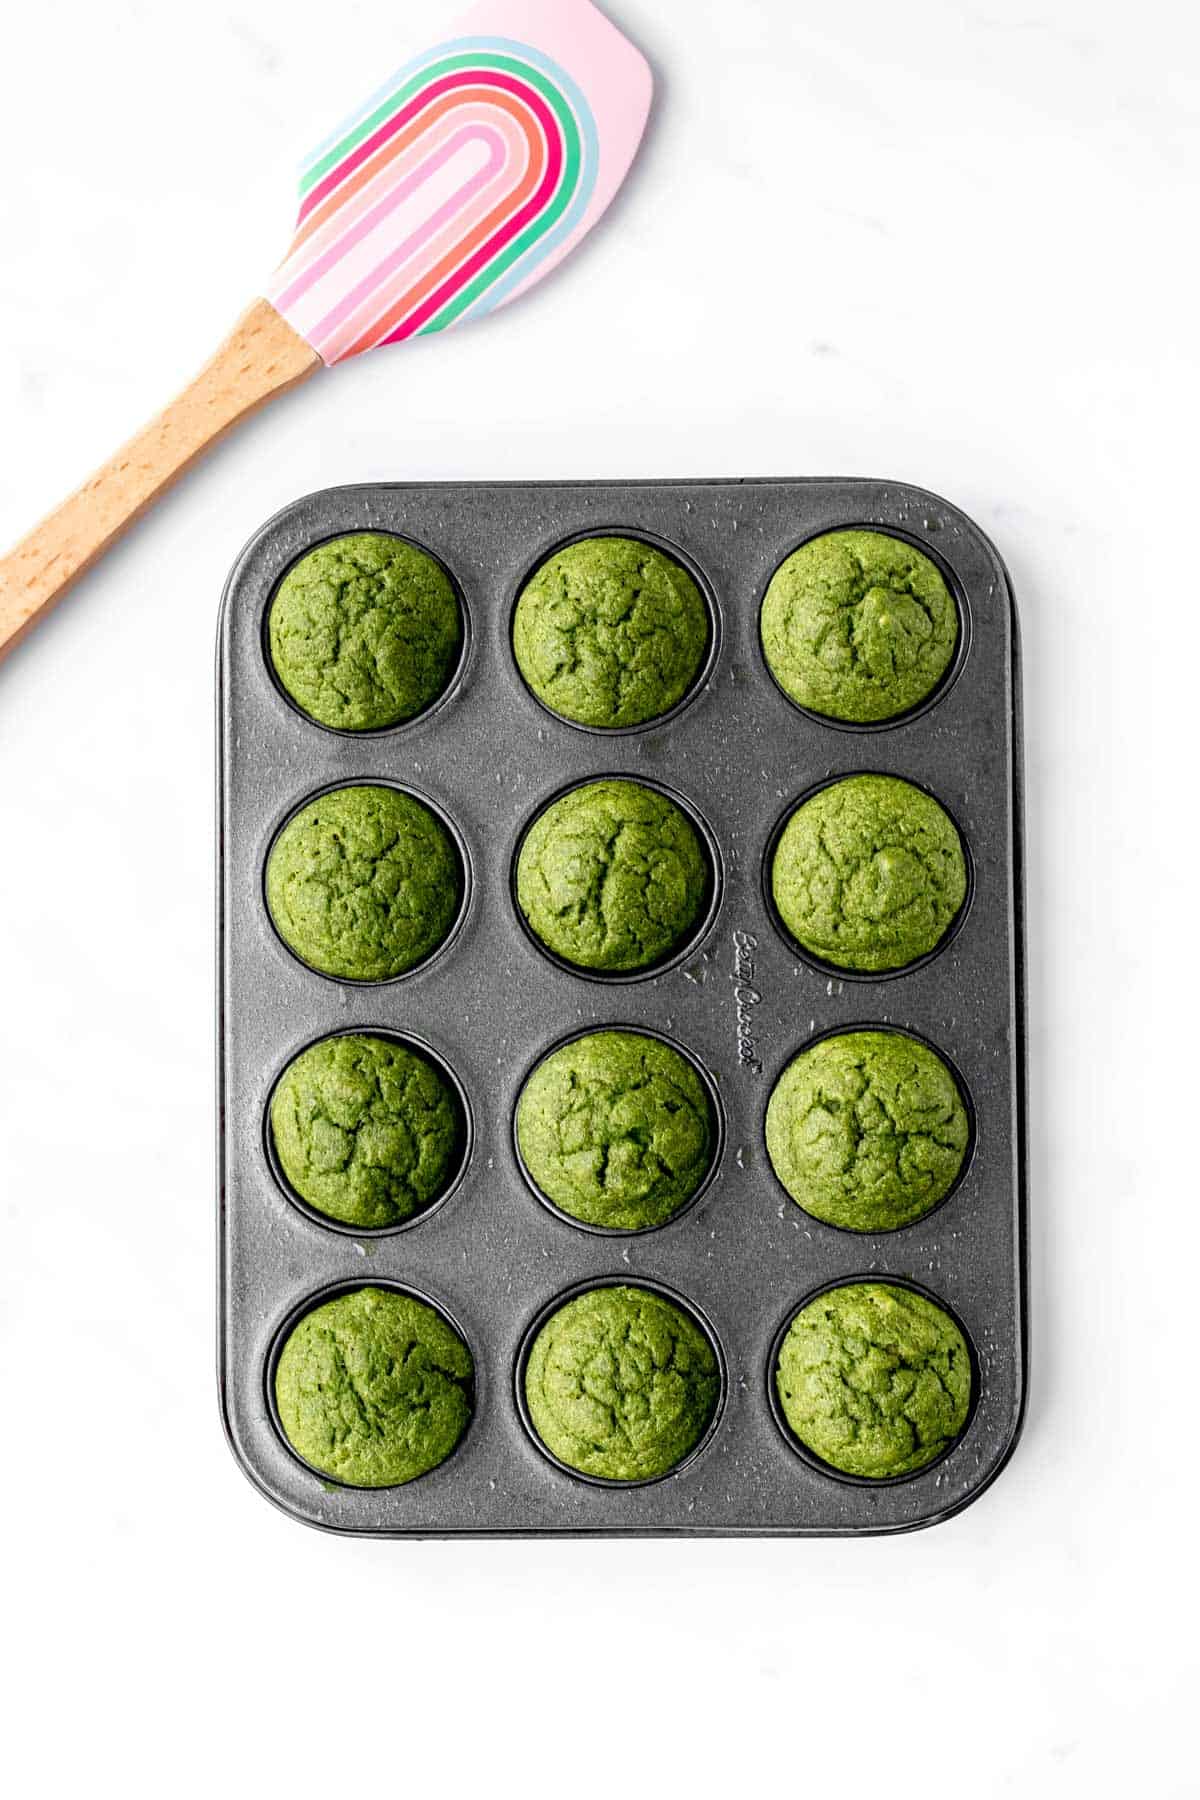 The baked green monster muffins in a mini muffin tin.